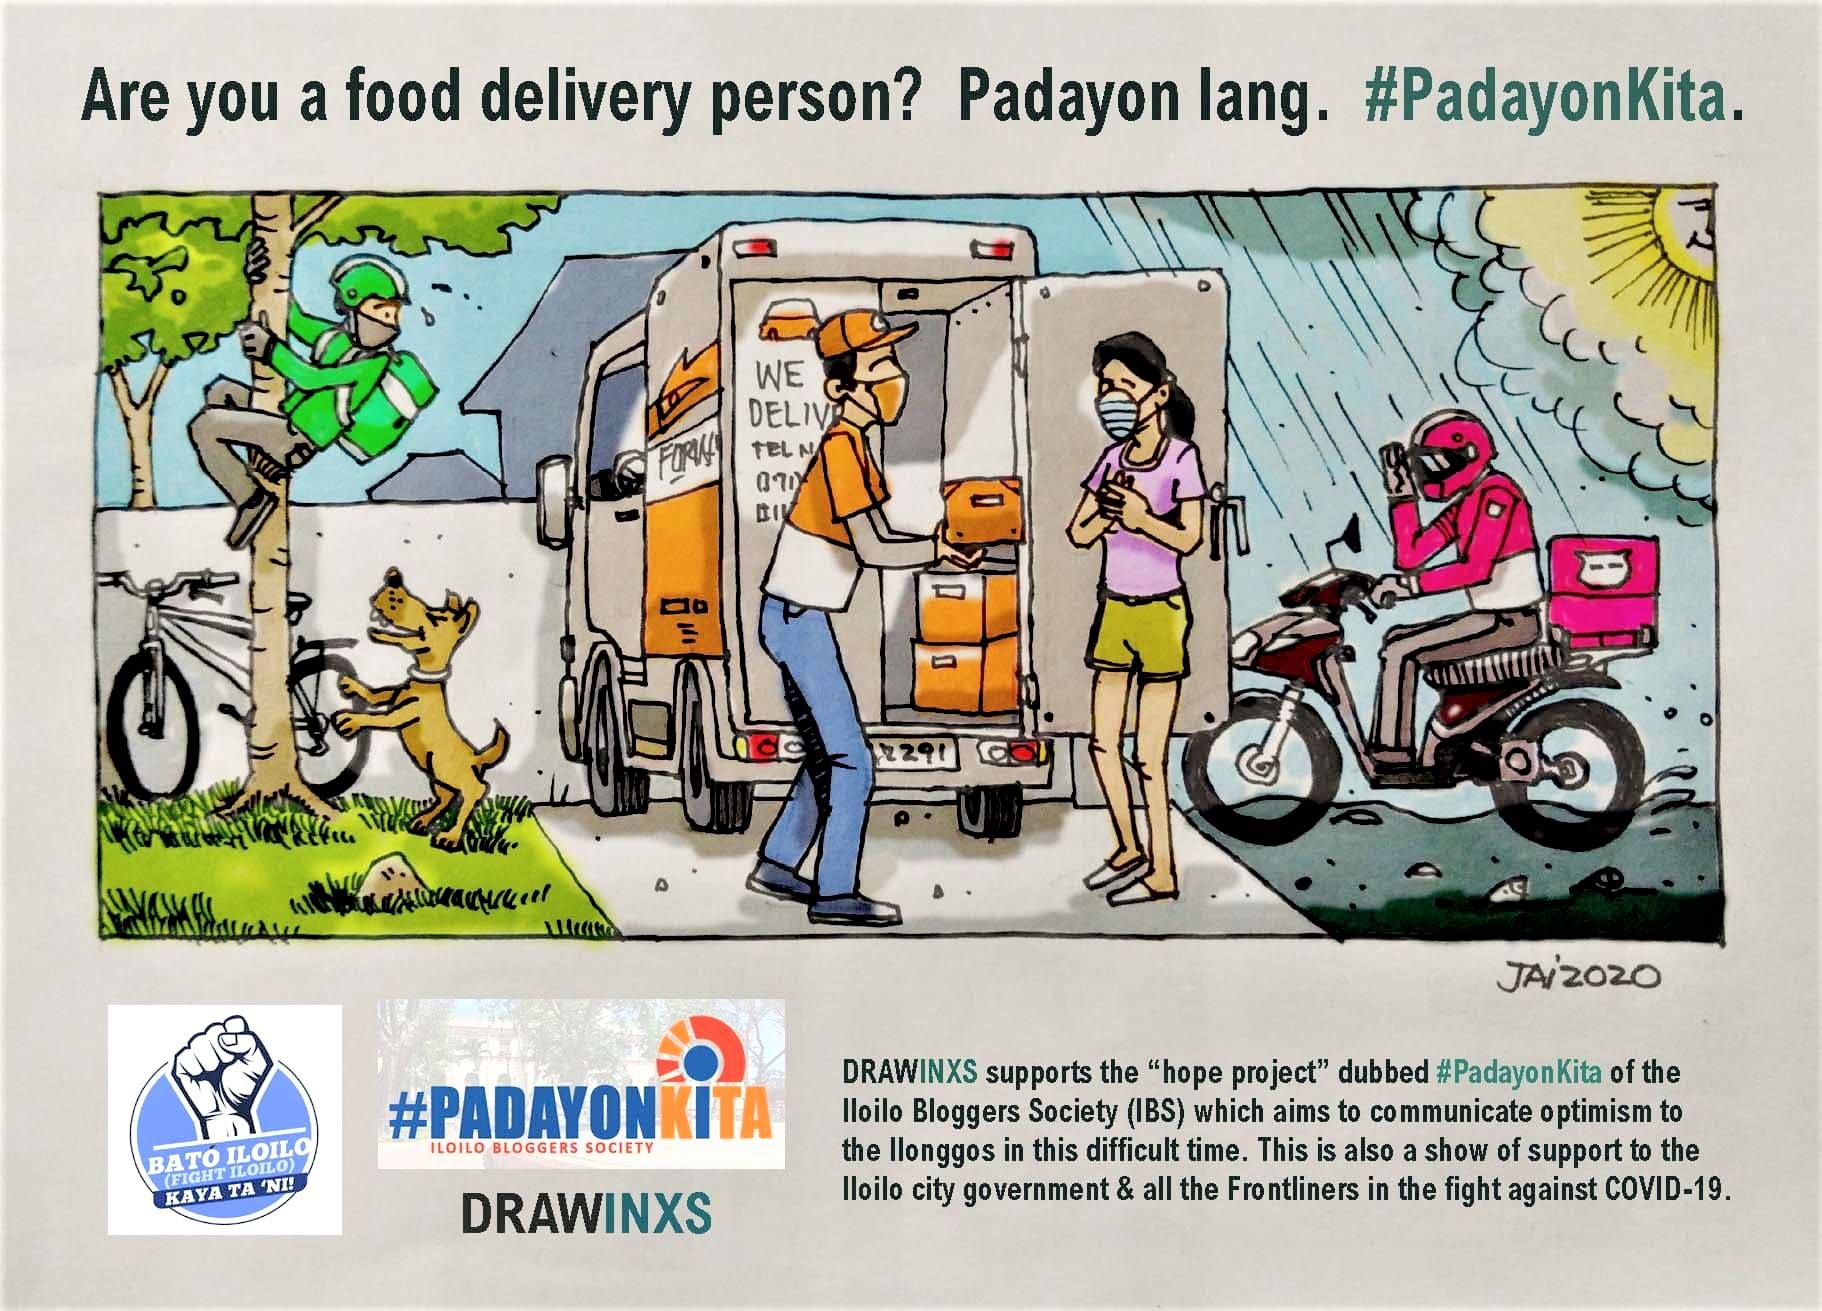 drawinxs on food delivery persons